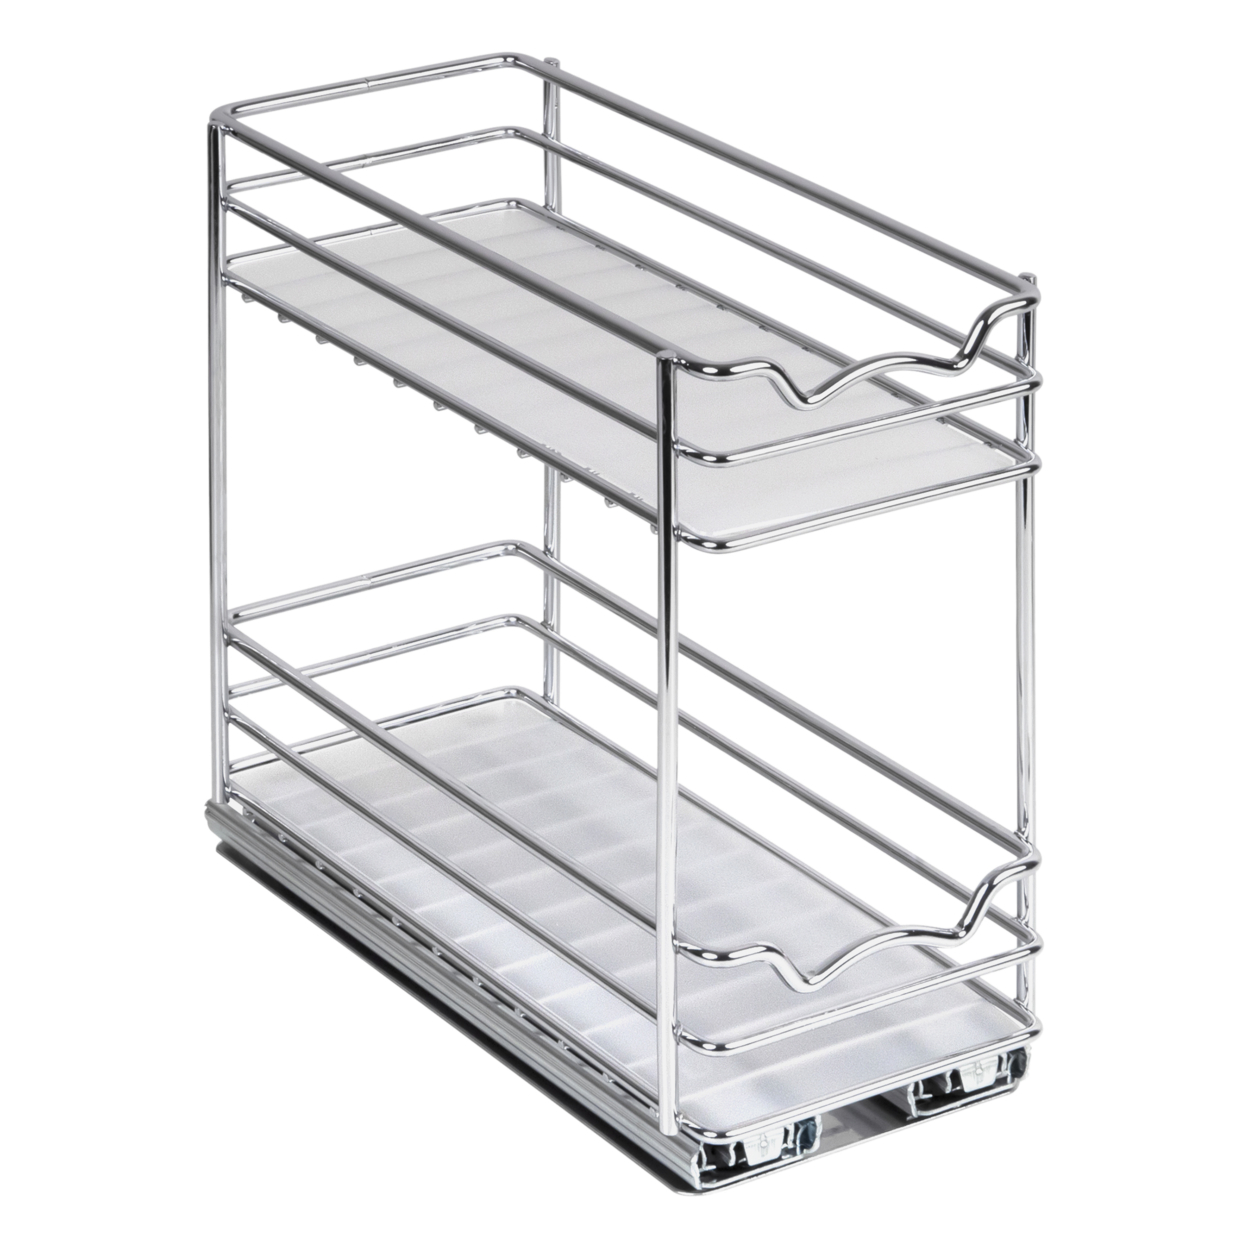 Spice Rack Organizer For Cabinet - Pull Out Double Tier Spice Rack 4-3/8W X 10-3/8D